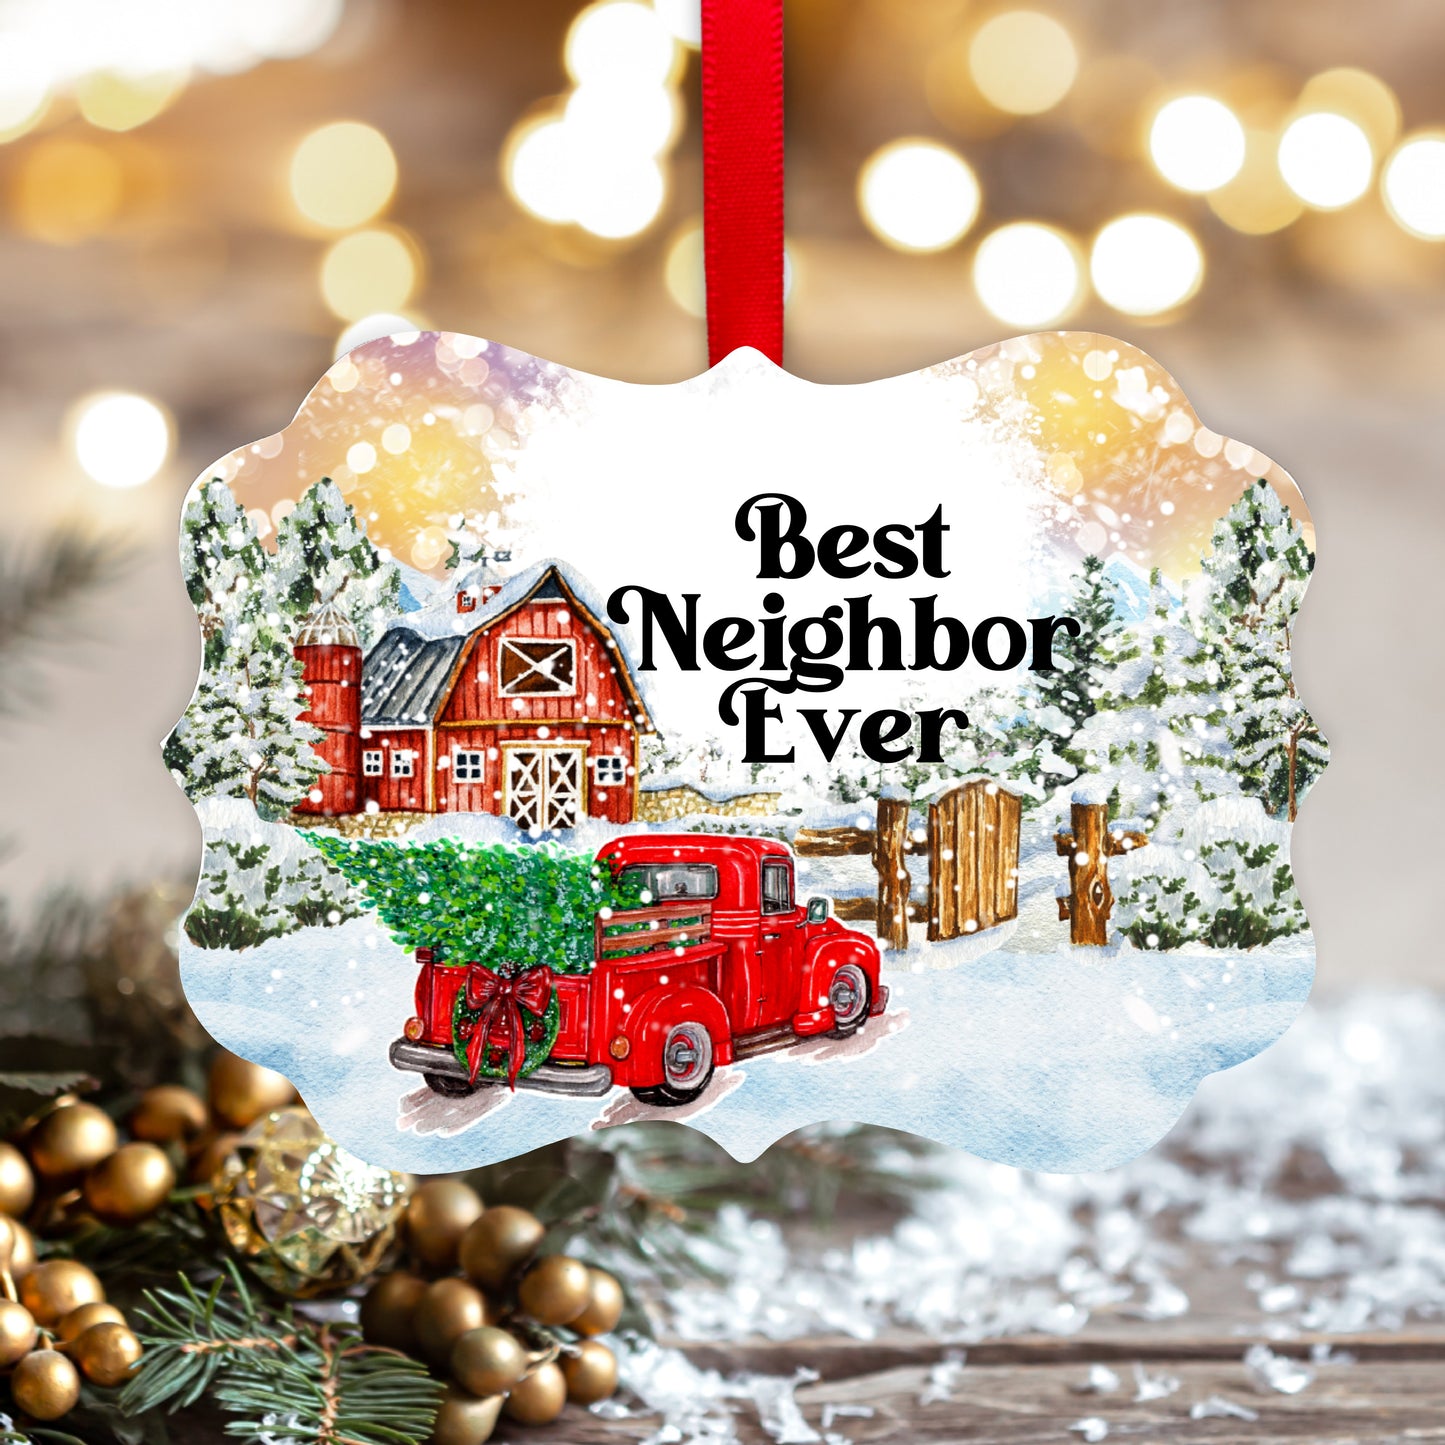 To Great Neighbors Ornament